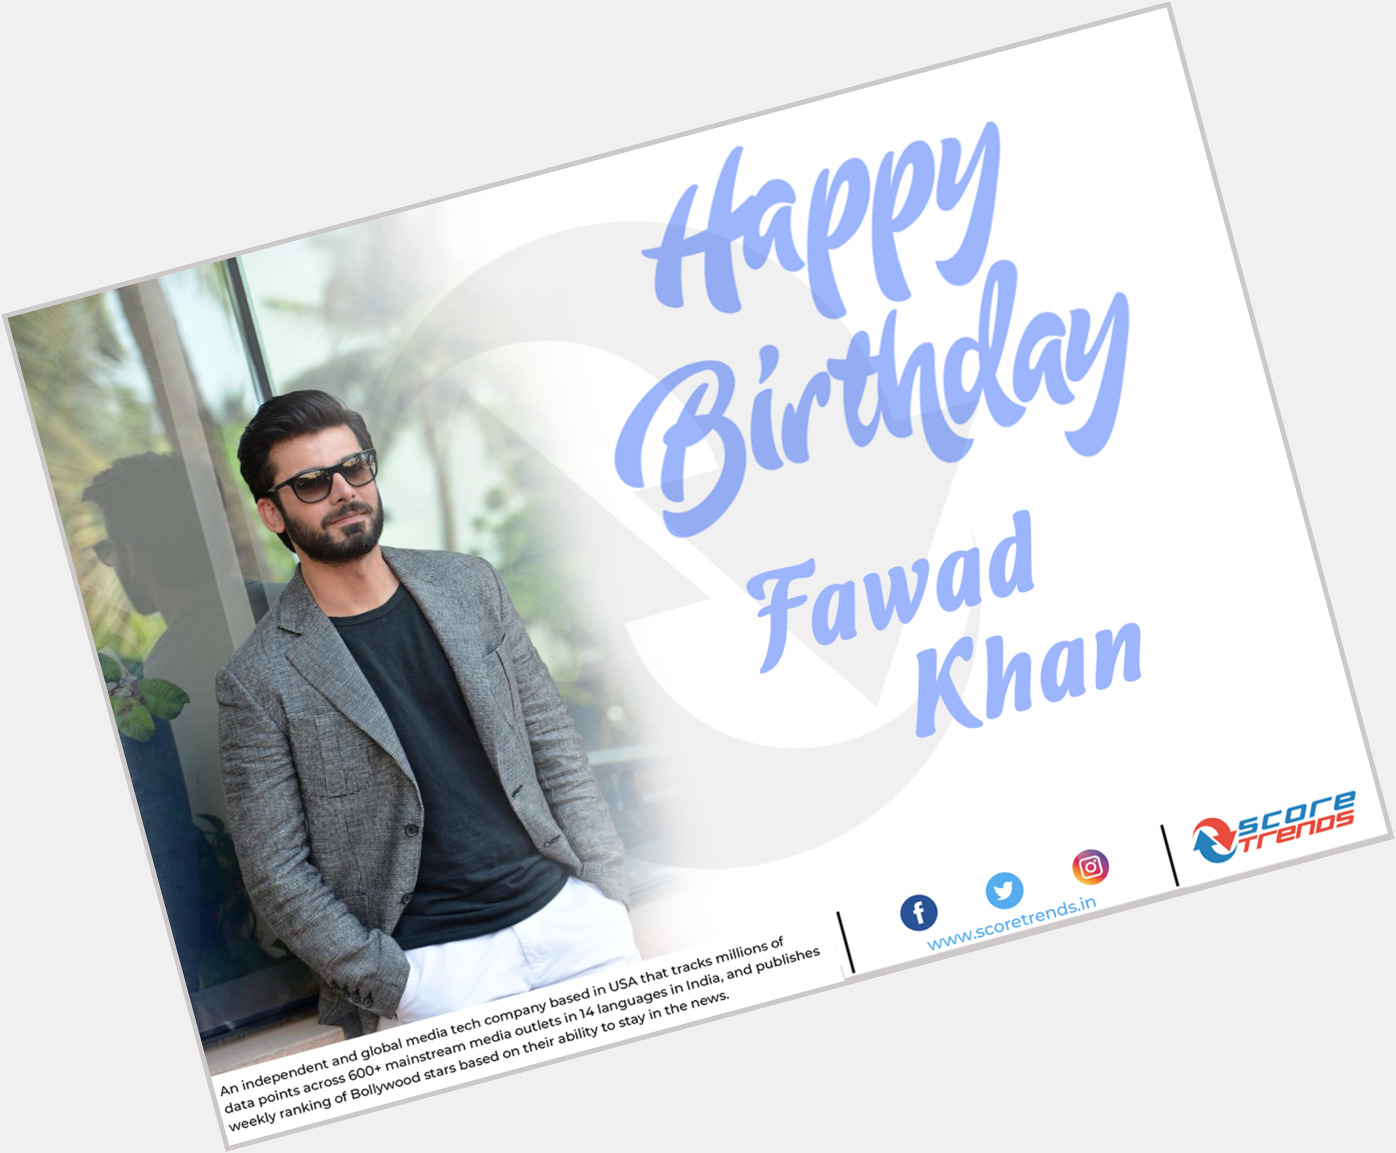 Score Trends wishes Fawad Khan a Happy Birthday!!   